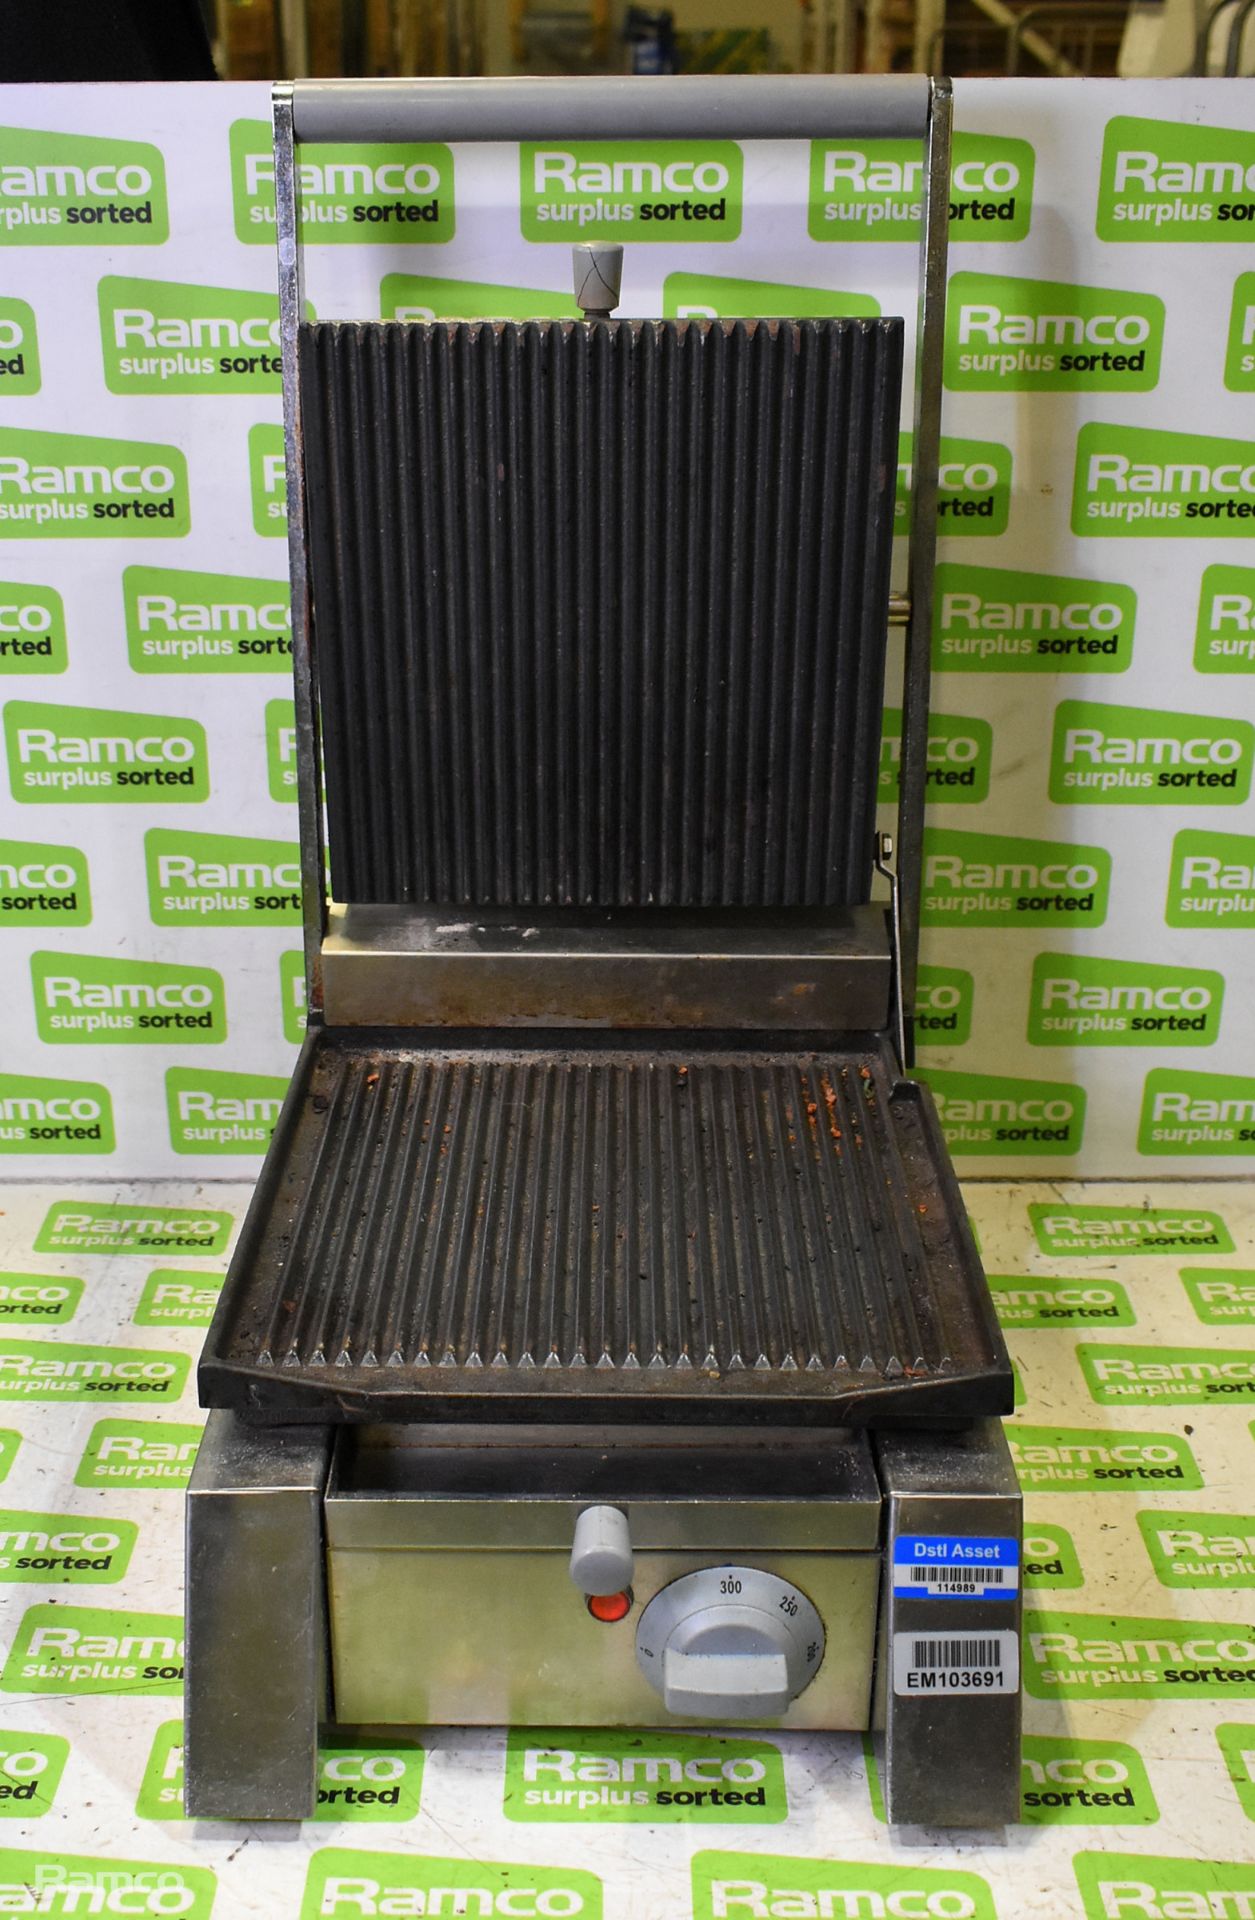 Electrolux stainless steel 260mm ribbed panini grill - Image 2 of 7